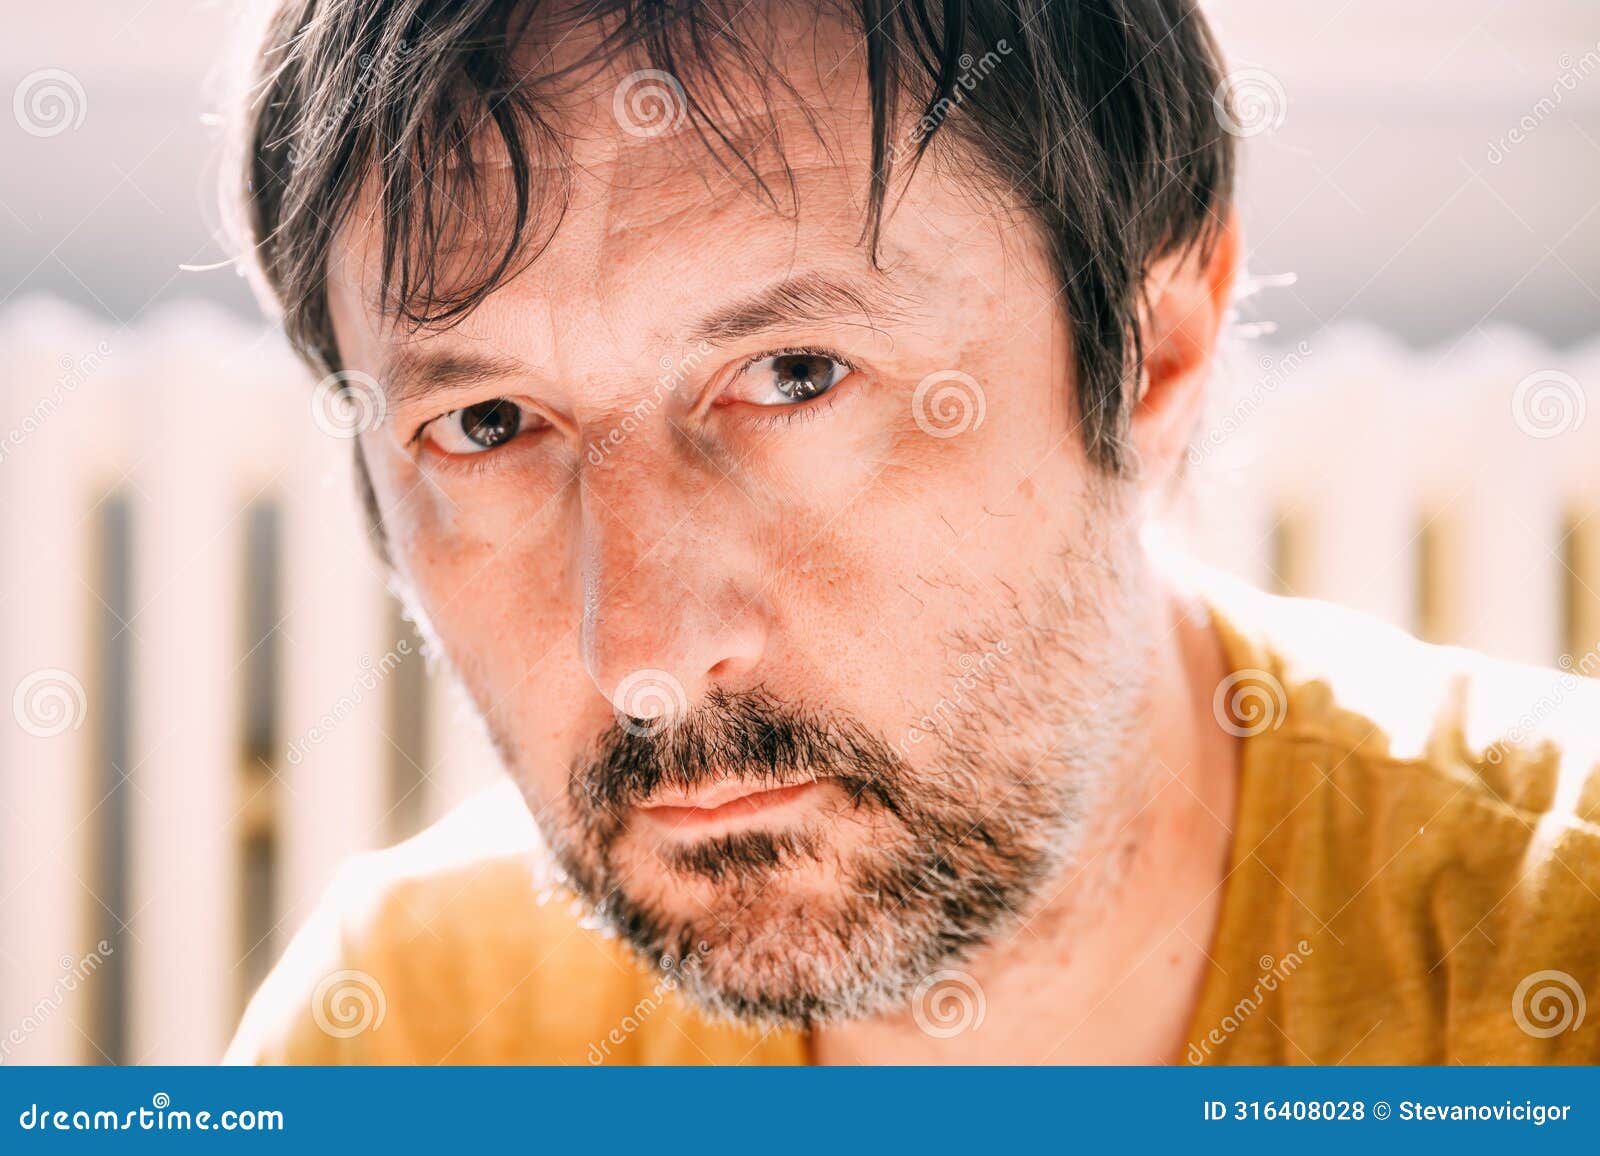 portrait of mid adult unkempt male with beard in late 40s looking at camera in his living room